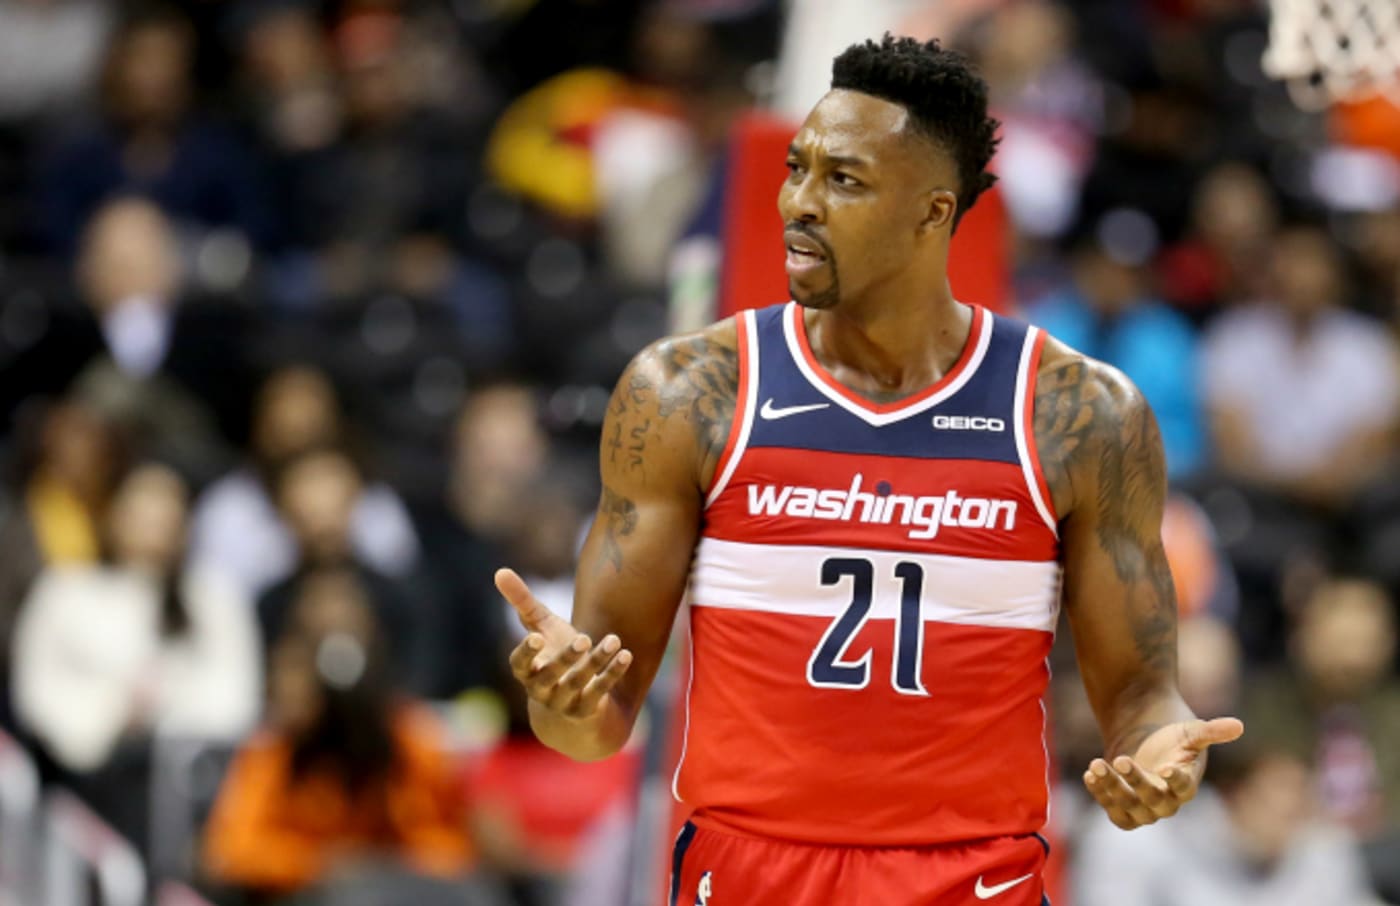 Dwight Howard #21 of the Washington Wizards reacts after a play